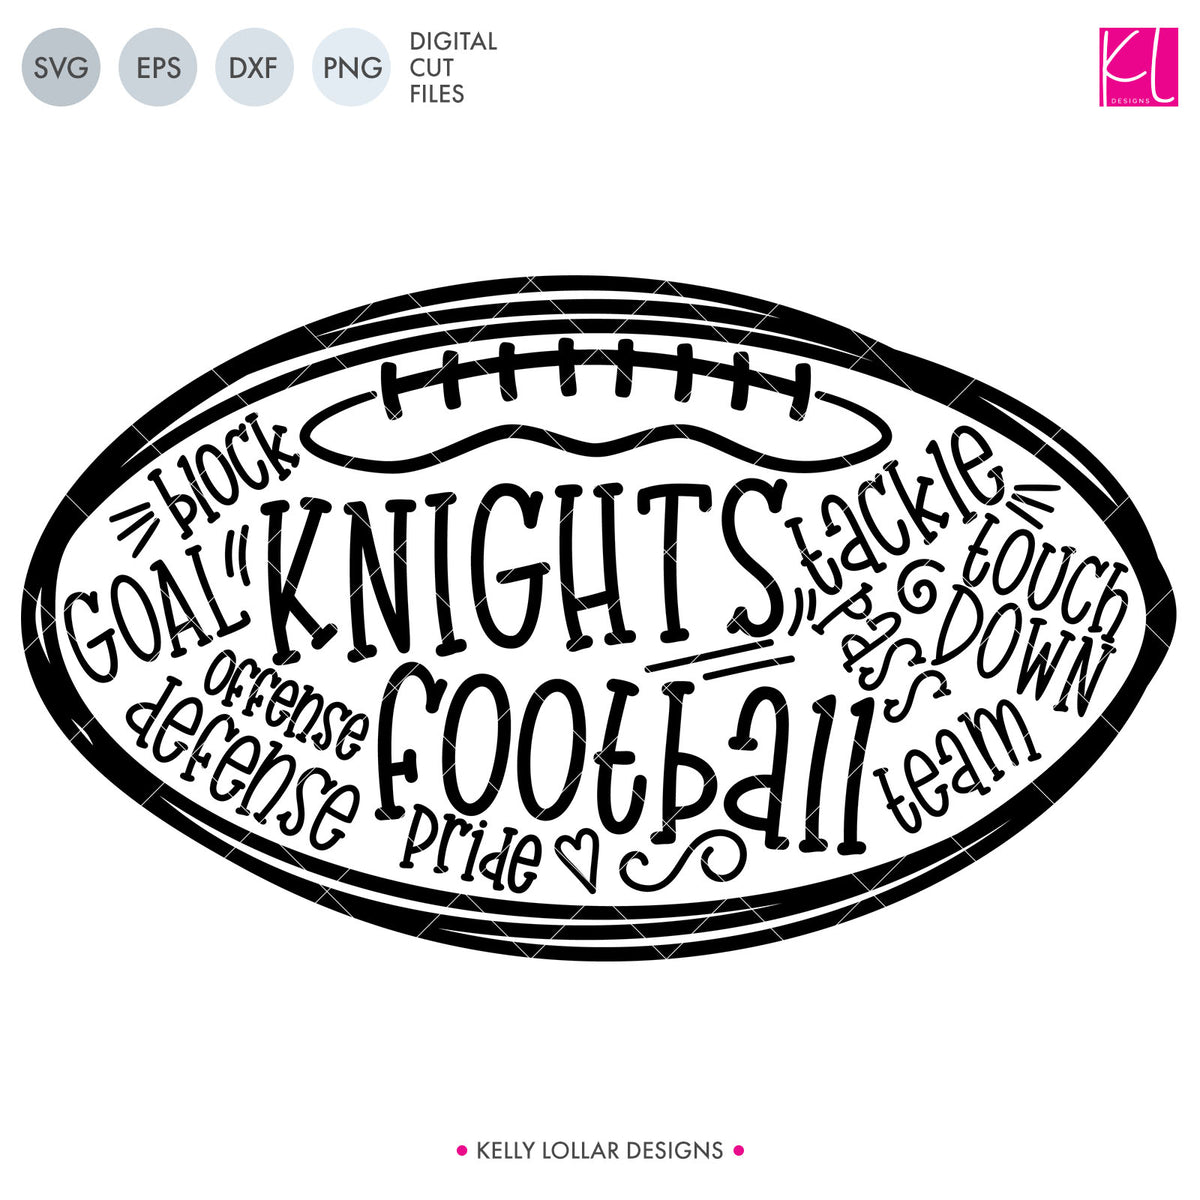 Knights Football Bundle | SVG DXF EPS PNG Cut Files